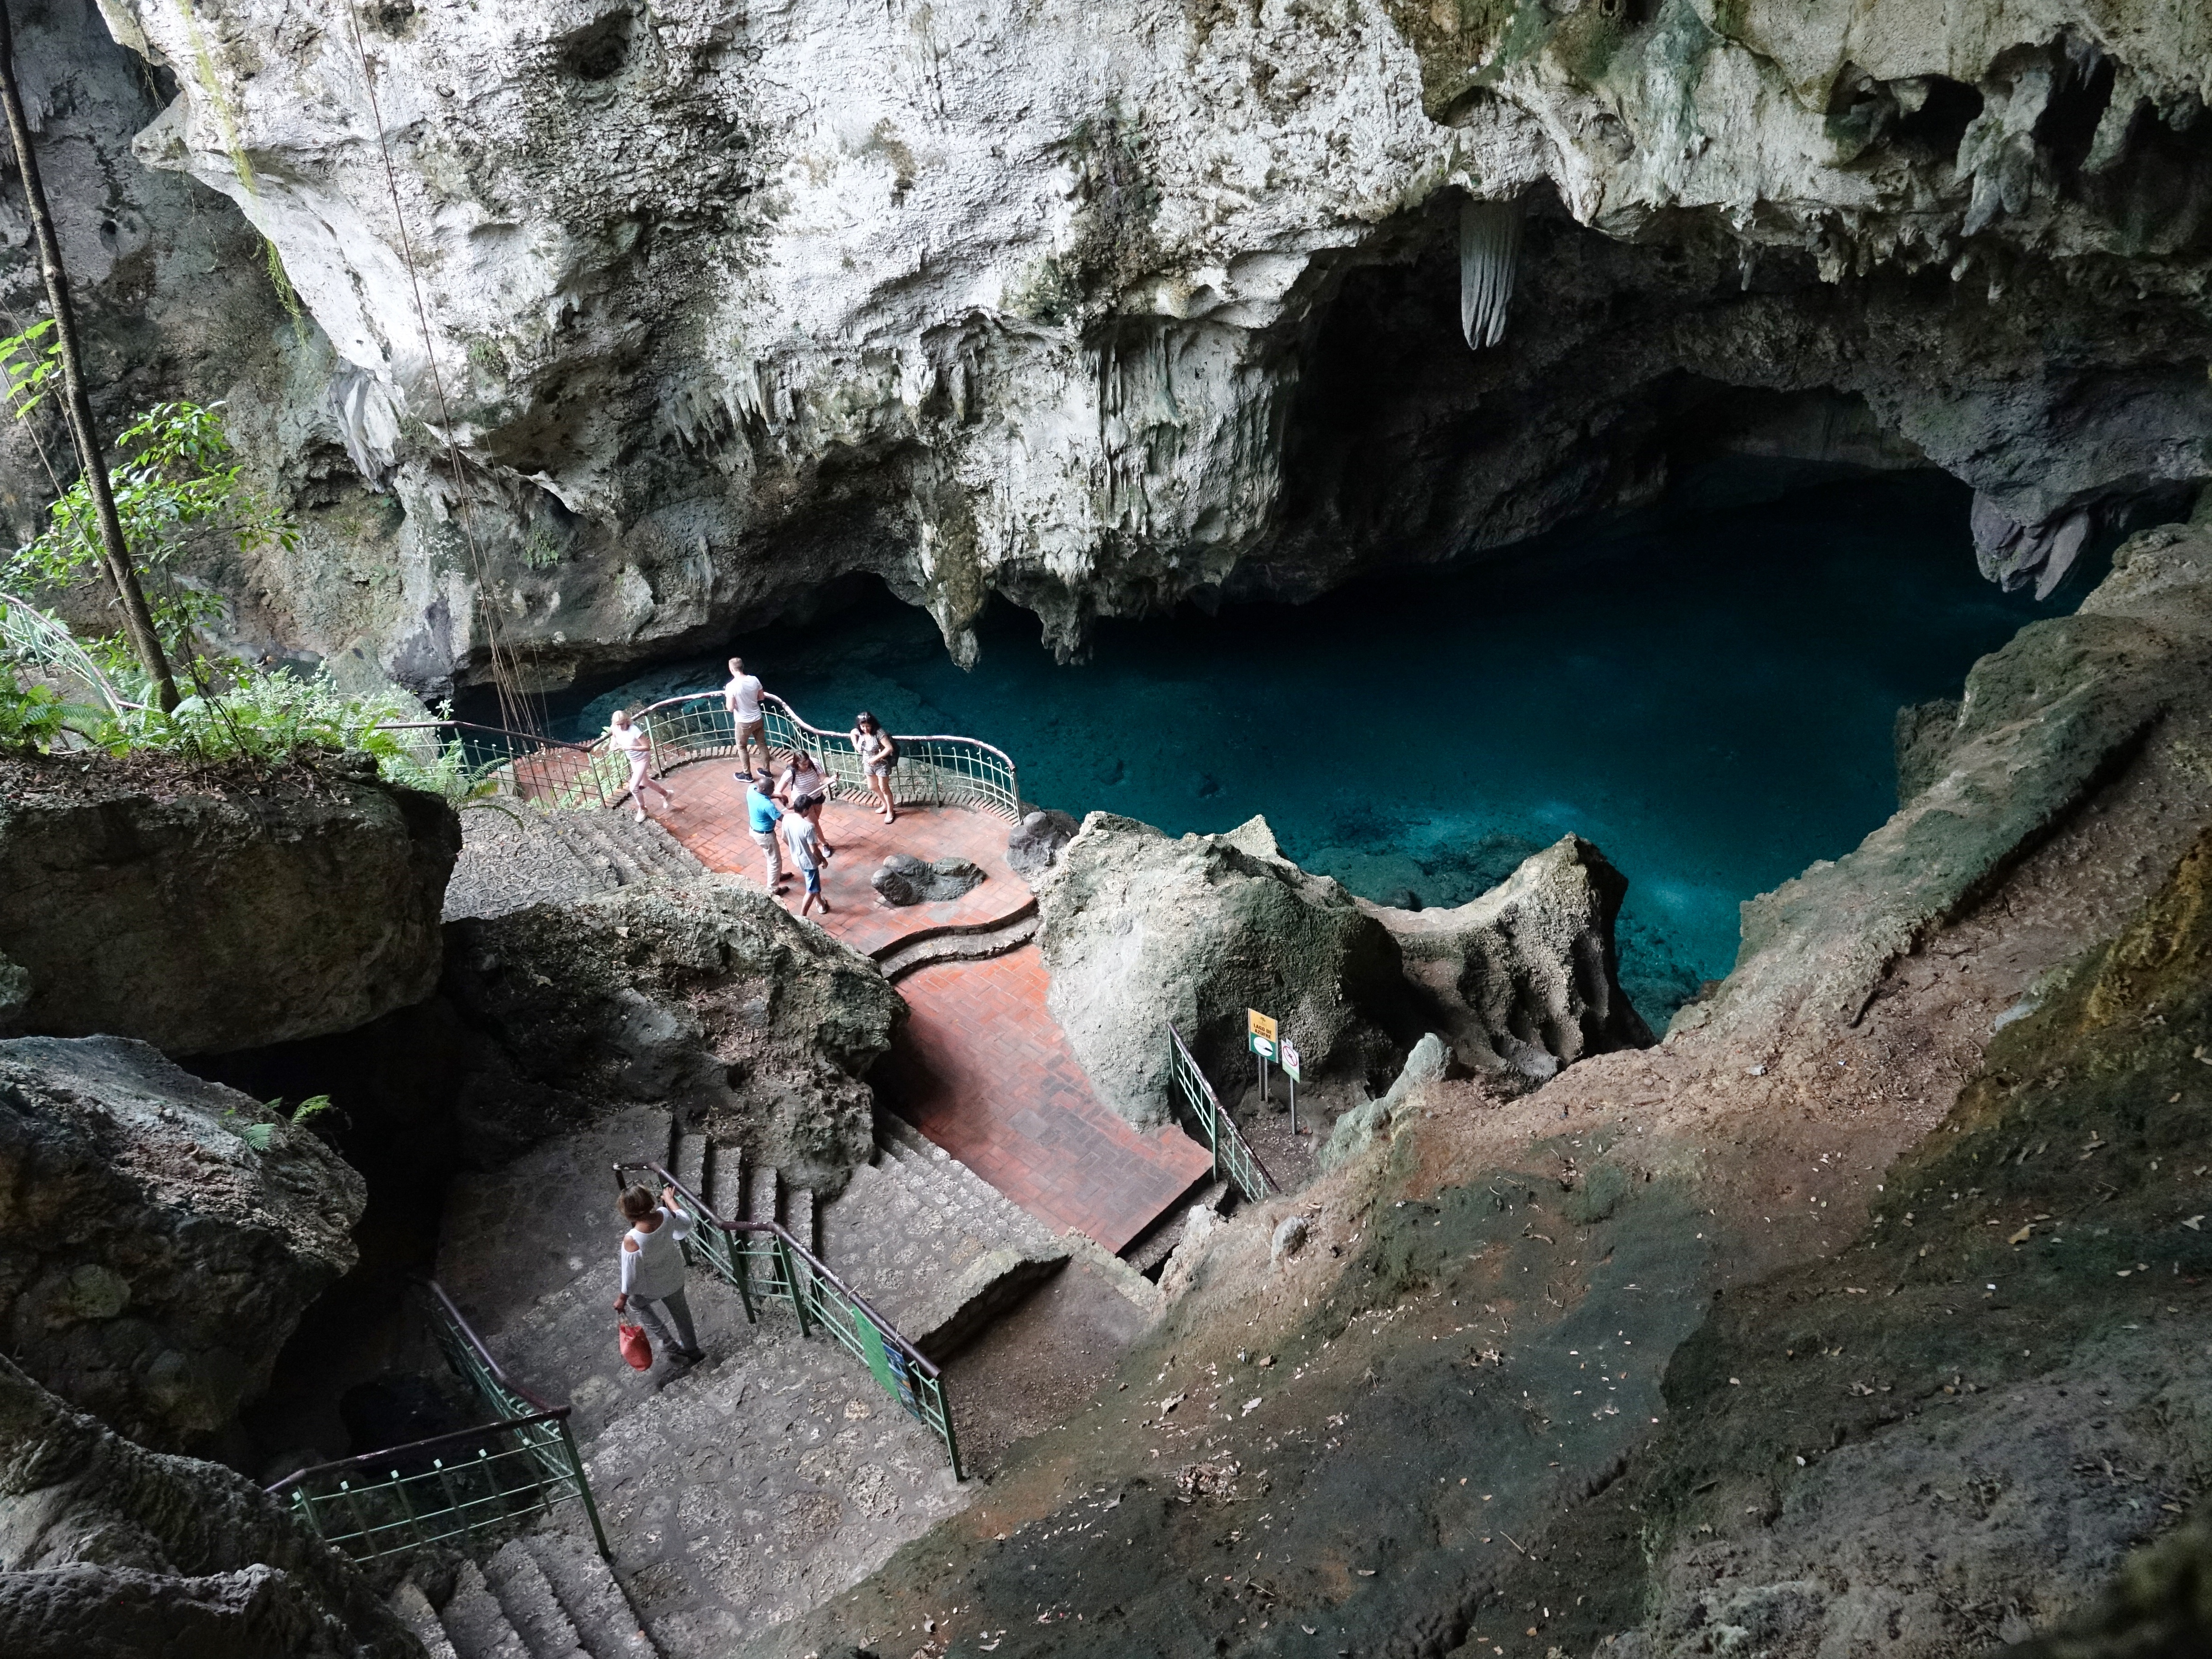 The blue is the fresh water cenote at the bottom of this open air cavern